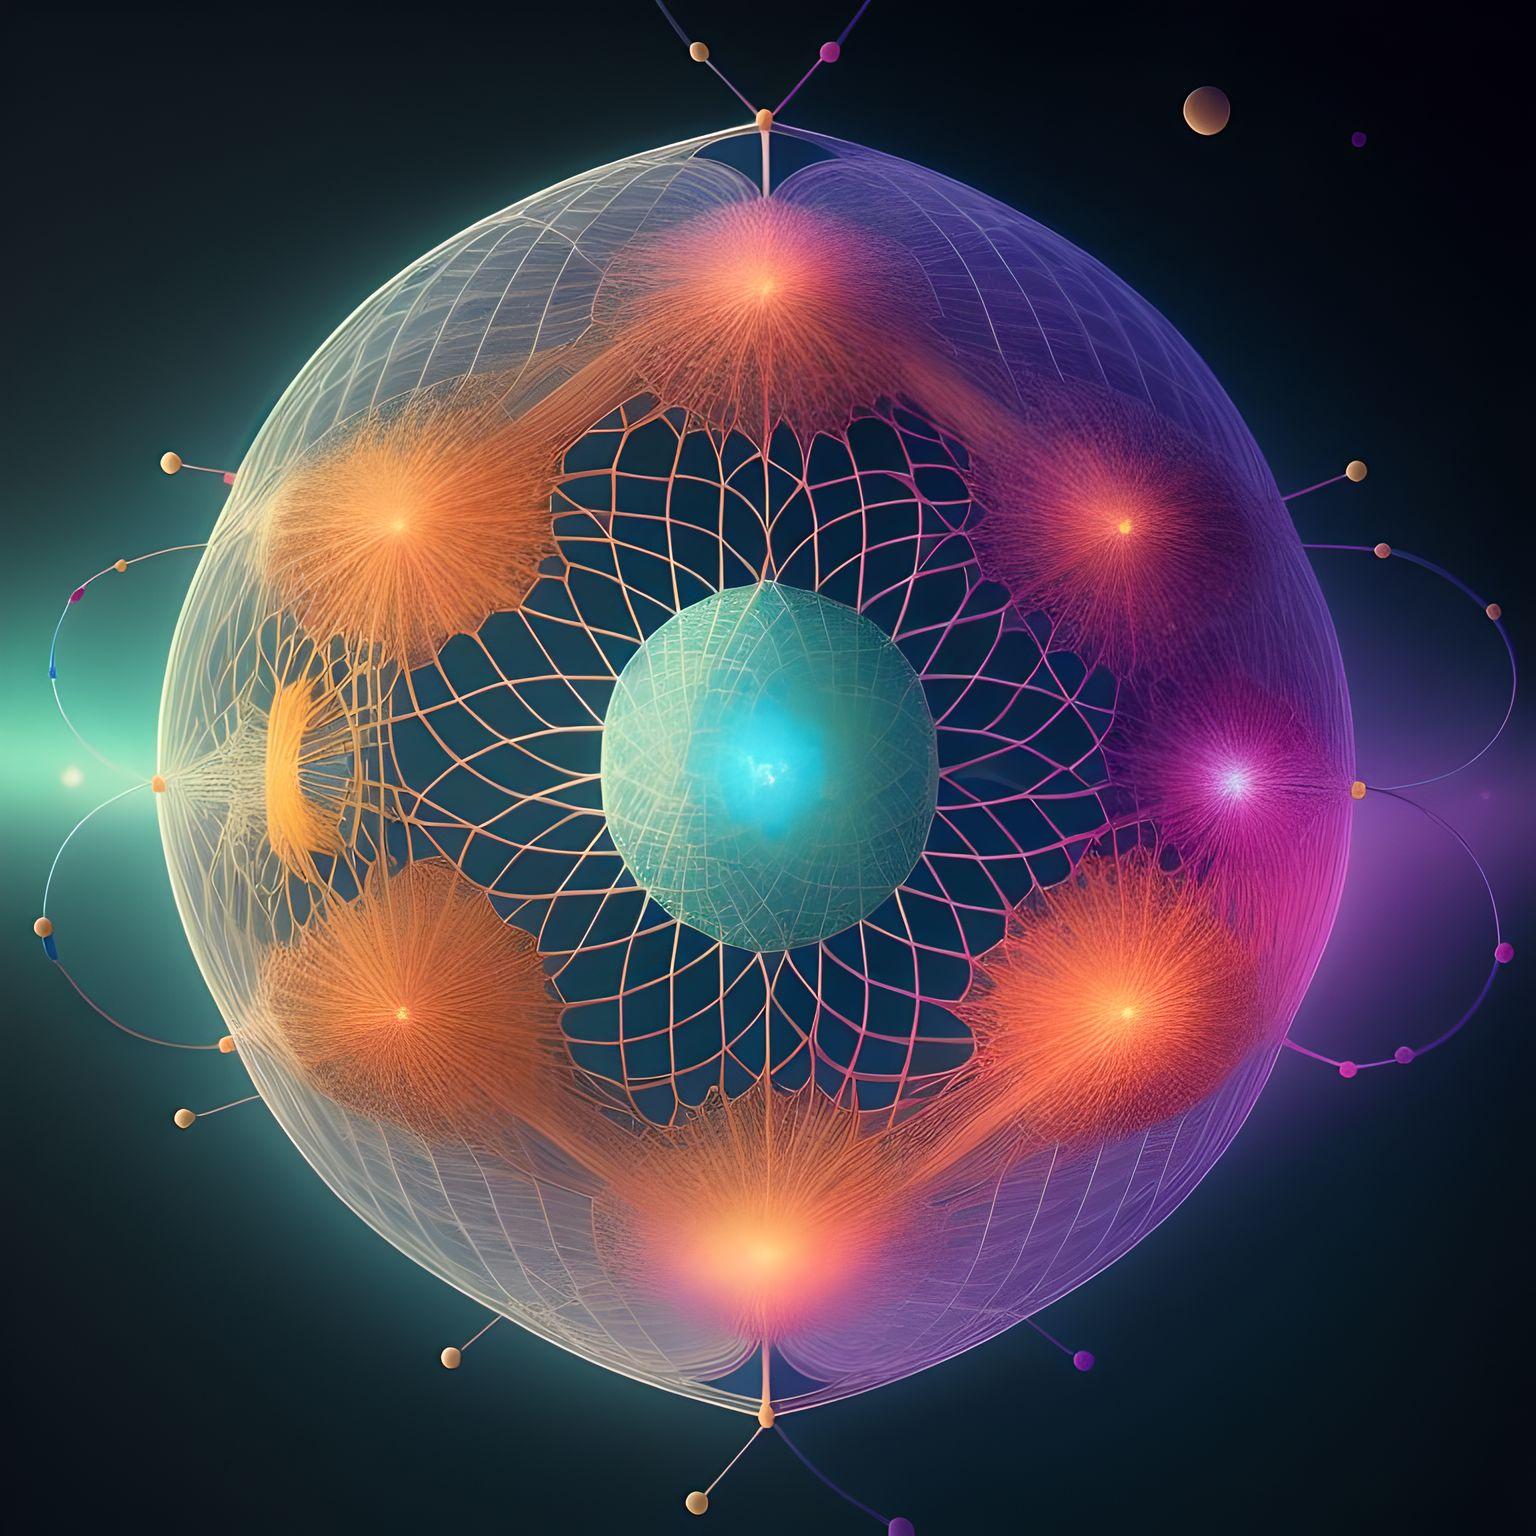 Conceptual picture generated by an AI showing several spherical shapes around the cricle and another sperical shape in center where all shapes are interconnected. The pictures tries to show the concept of human knowledge graph.